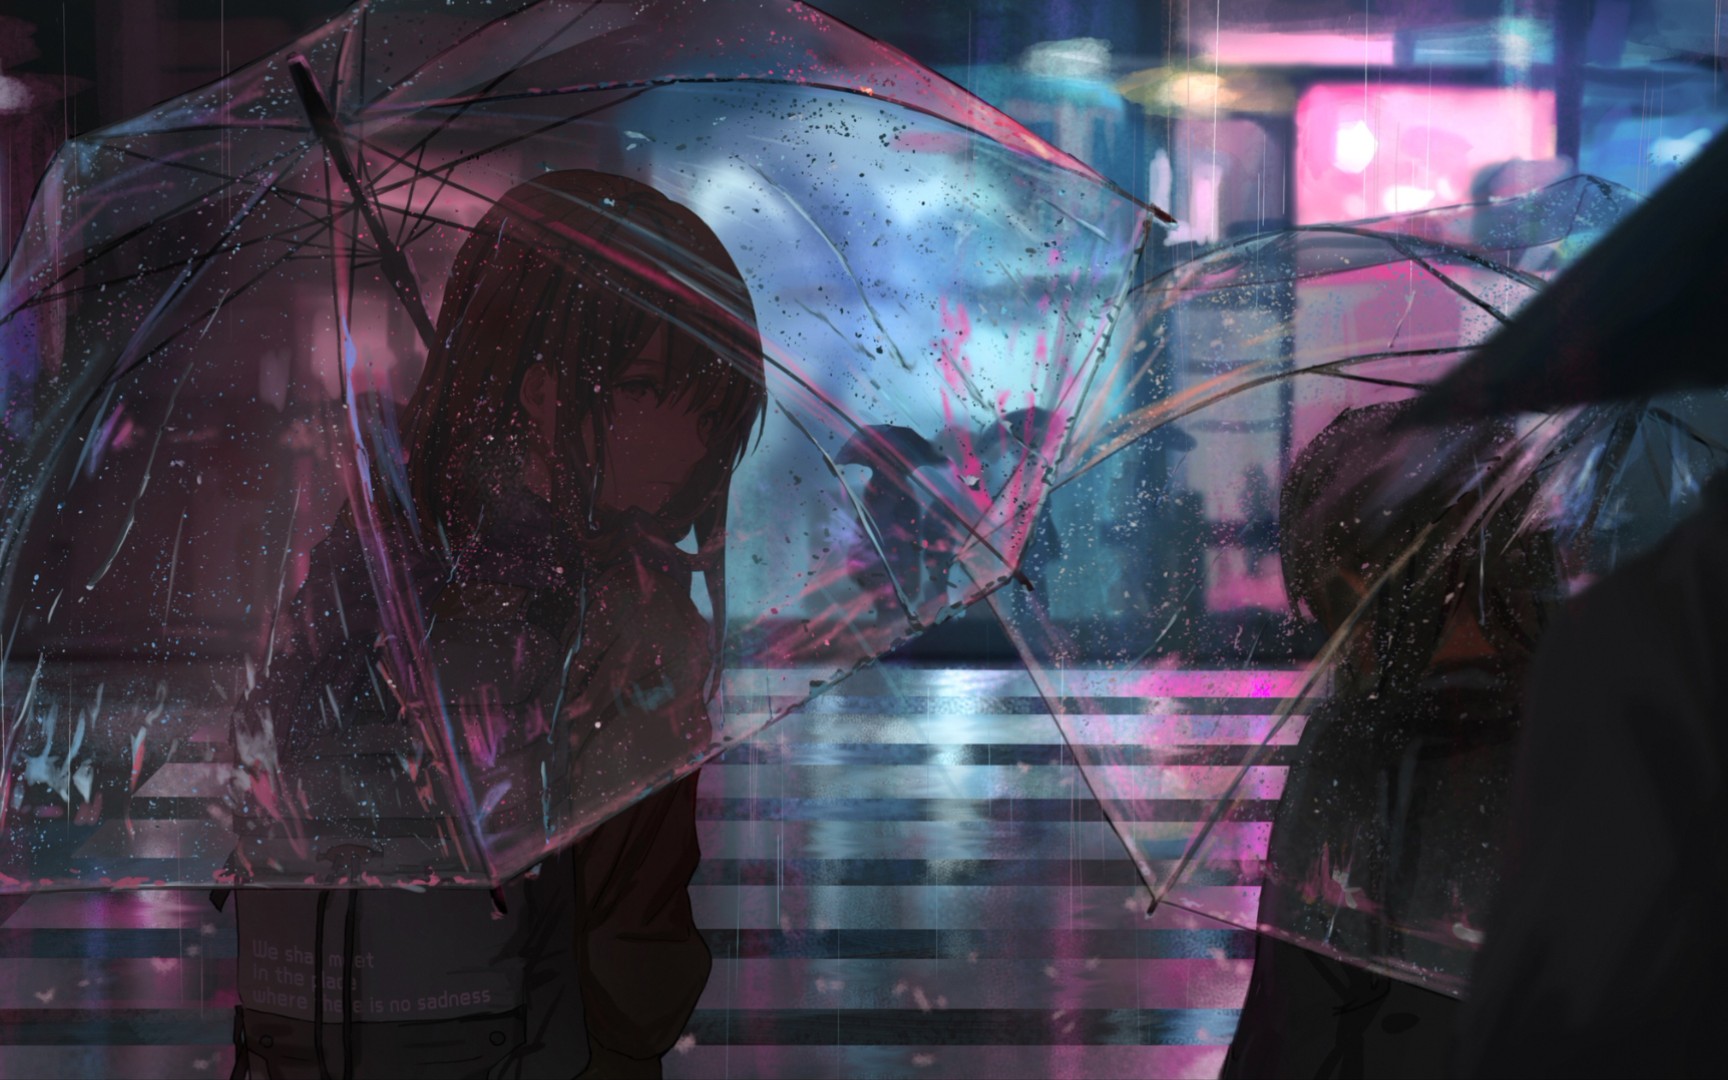 Rainy Day by mclelun on DeviantArt